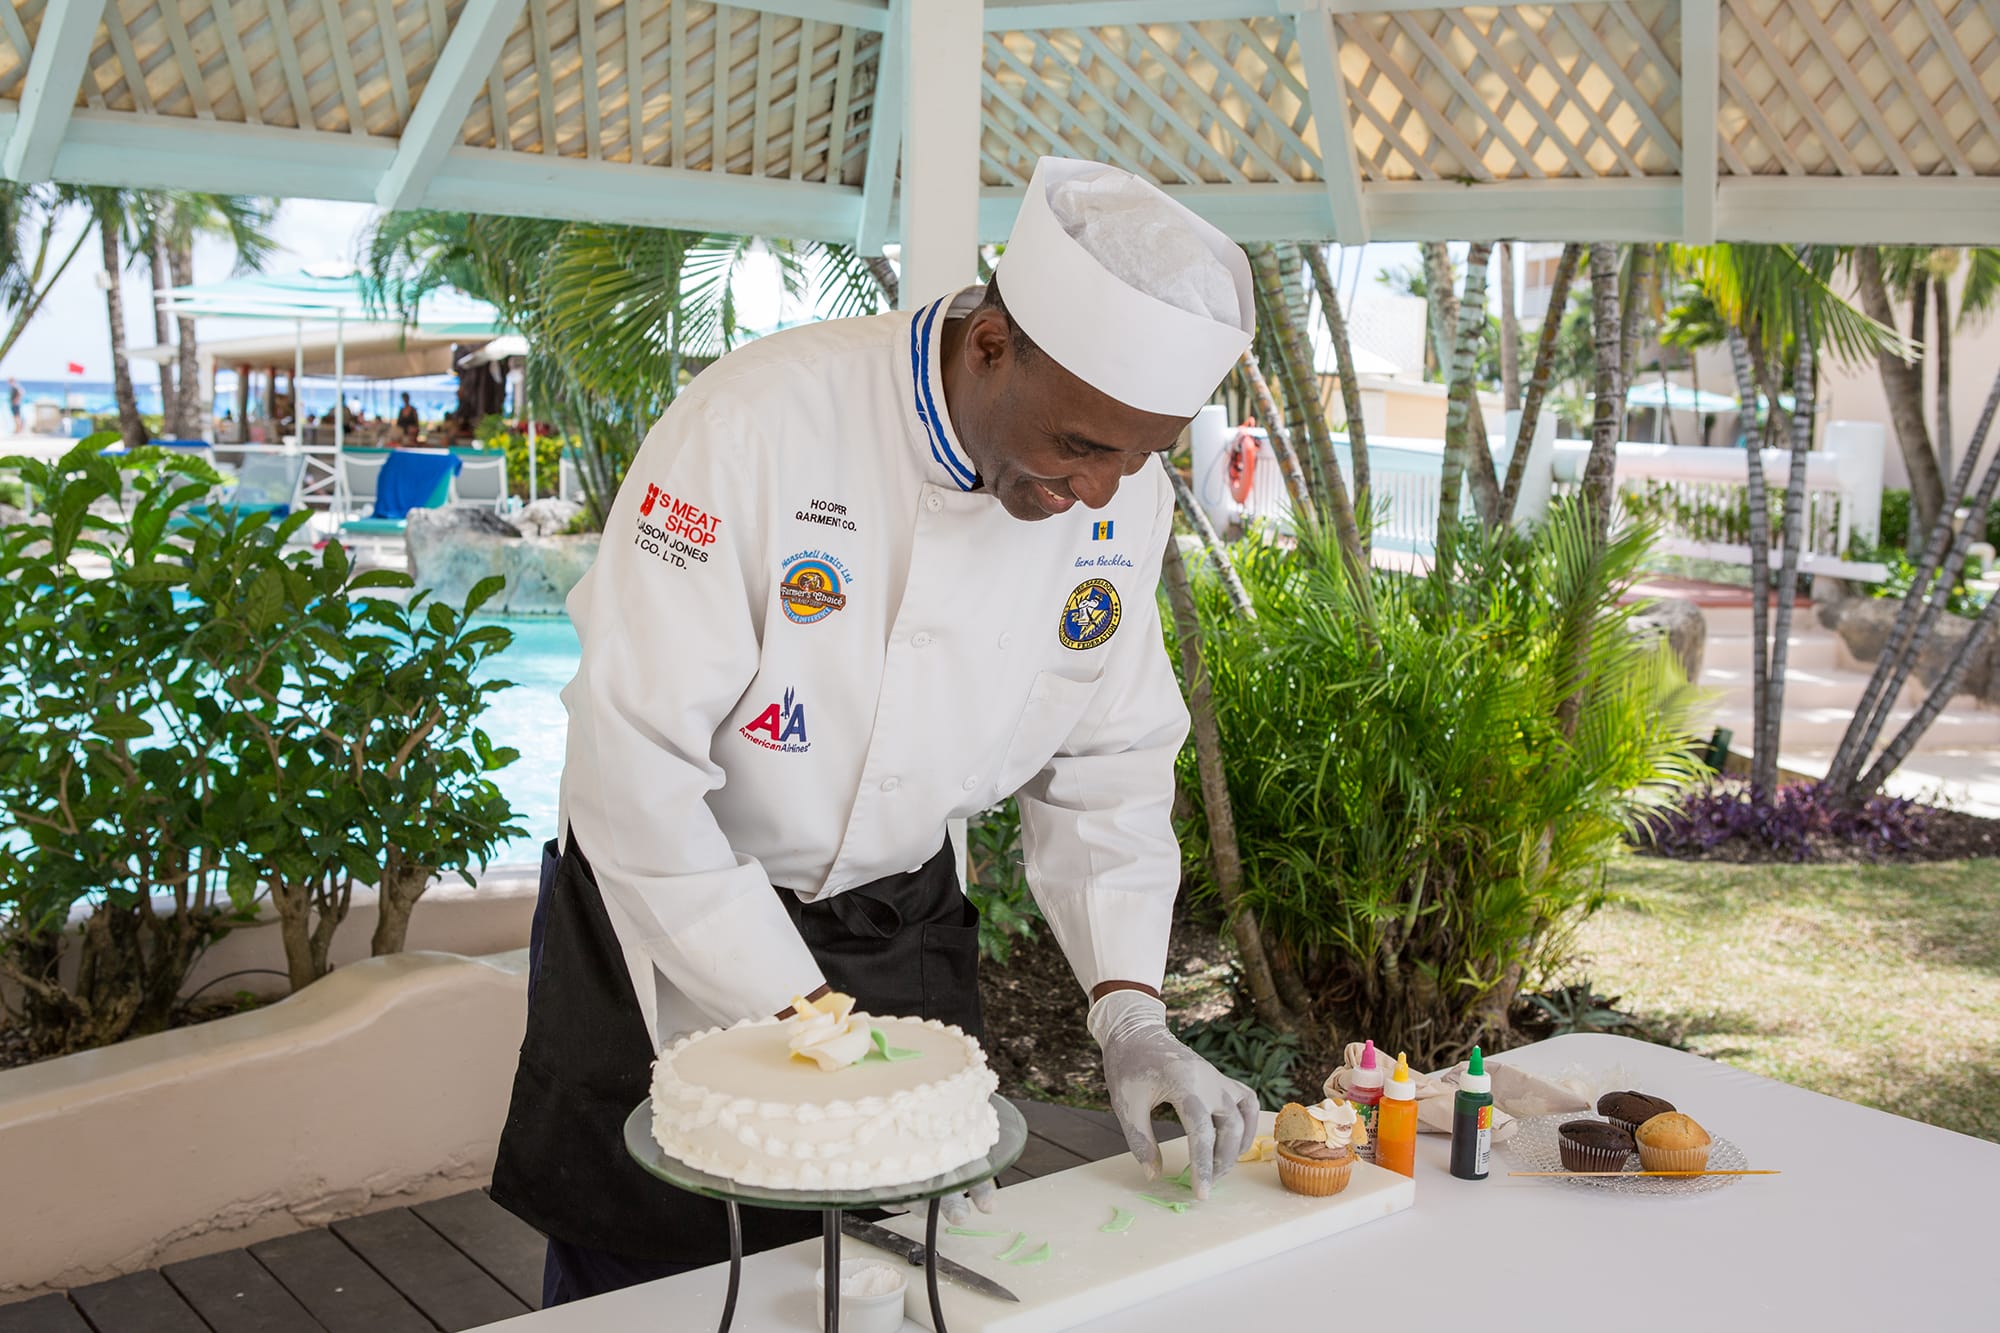 Cooking Classes to Make Caribbean Food: Turtle Beach